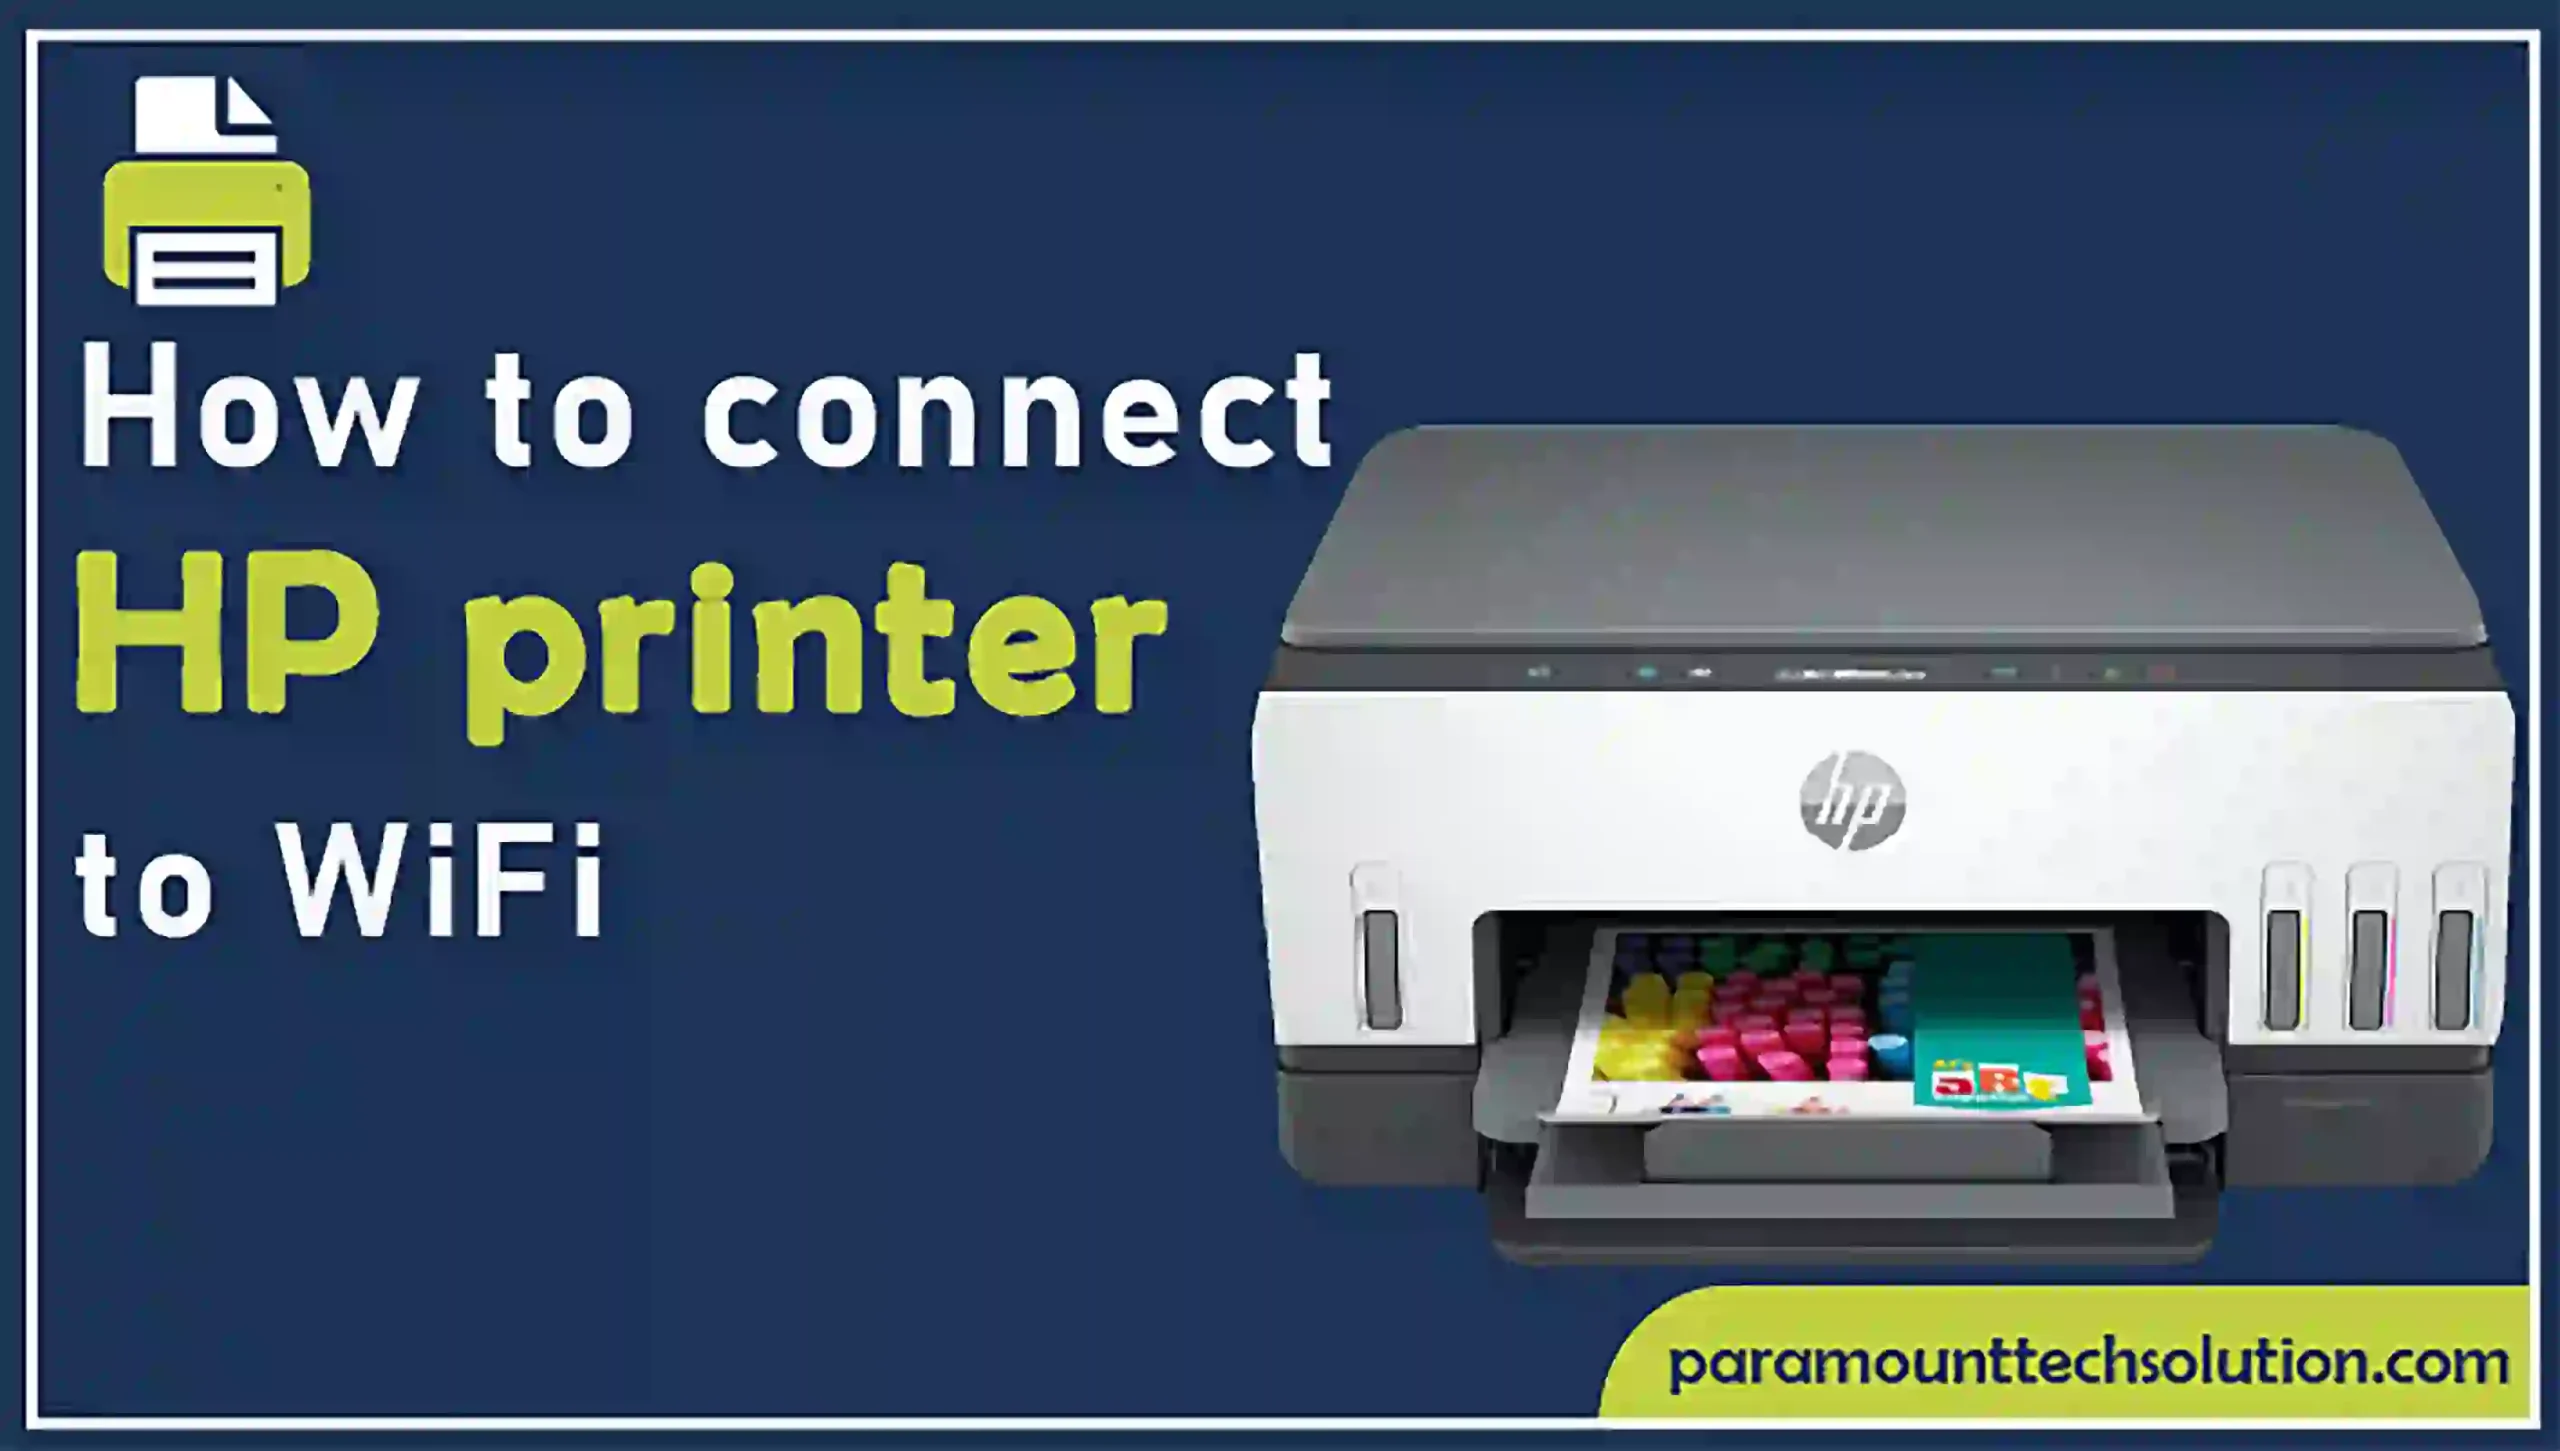 How to connect HP printer to WiFi using 4 different method learn how to add HP printer to wifi